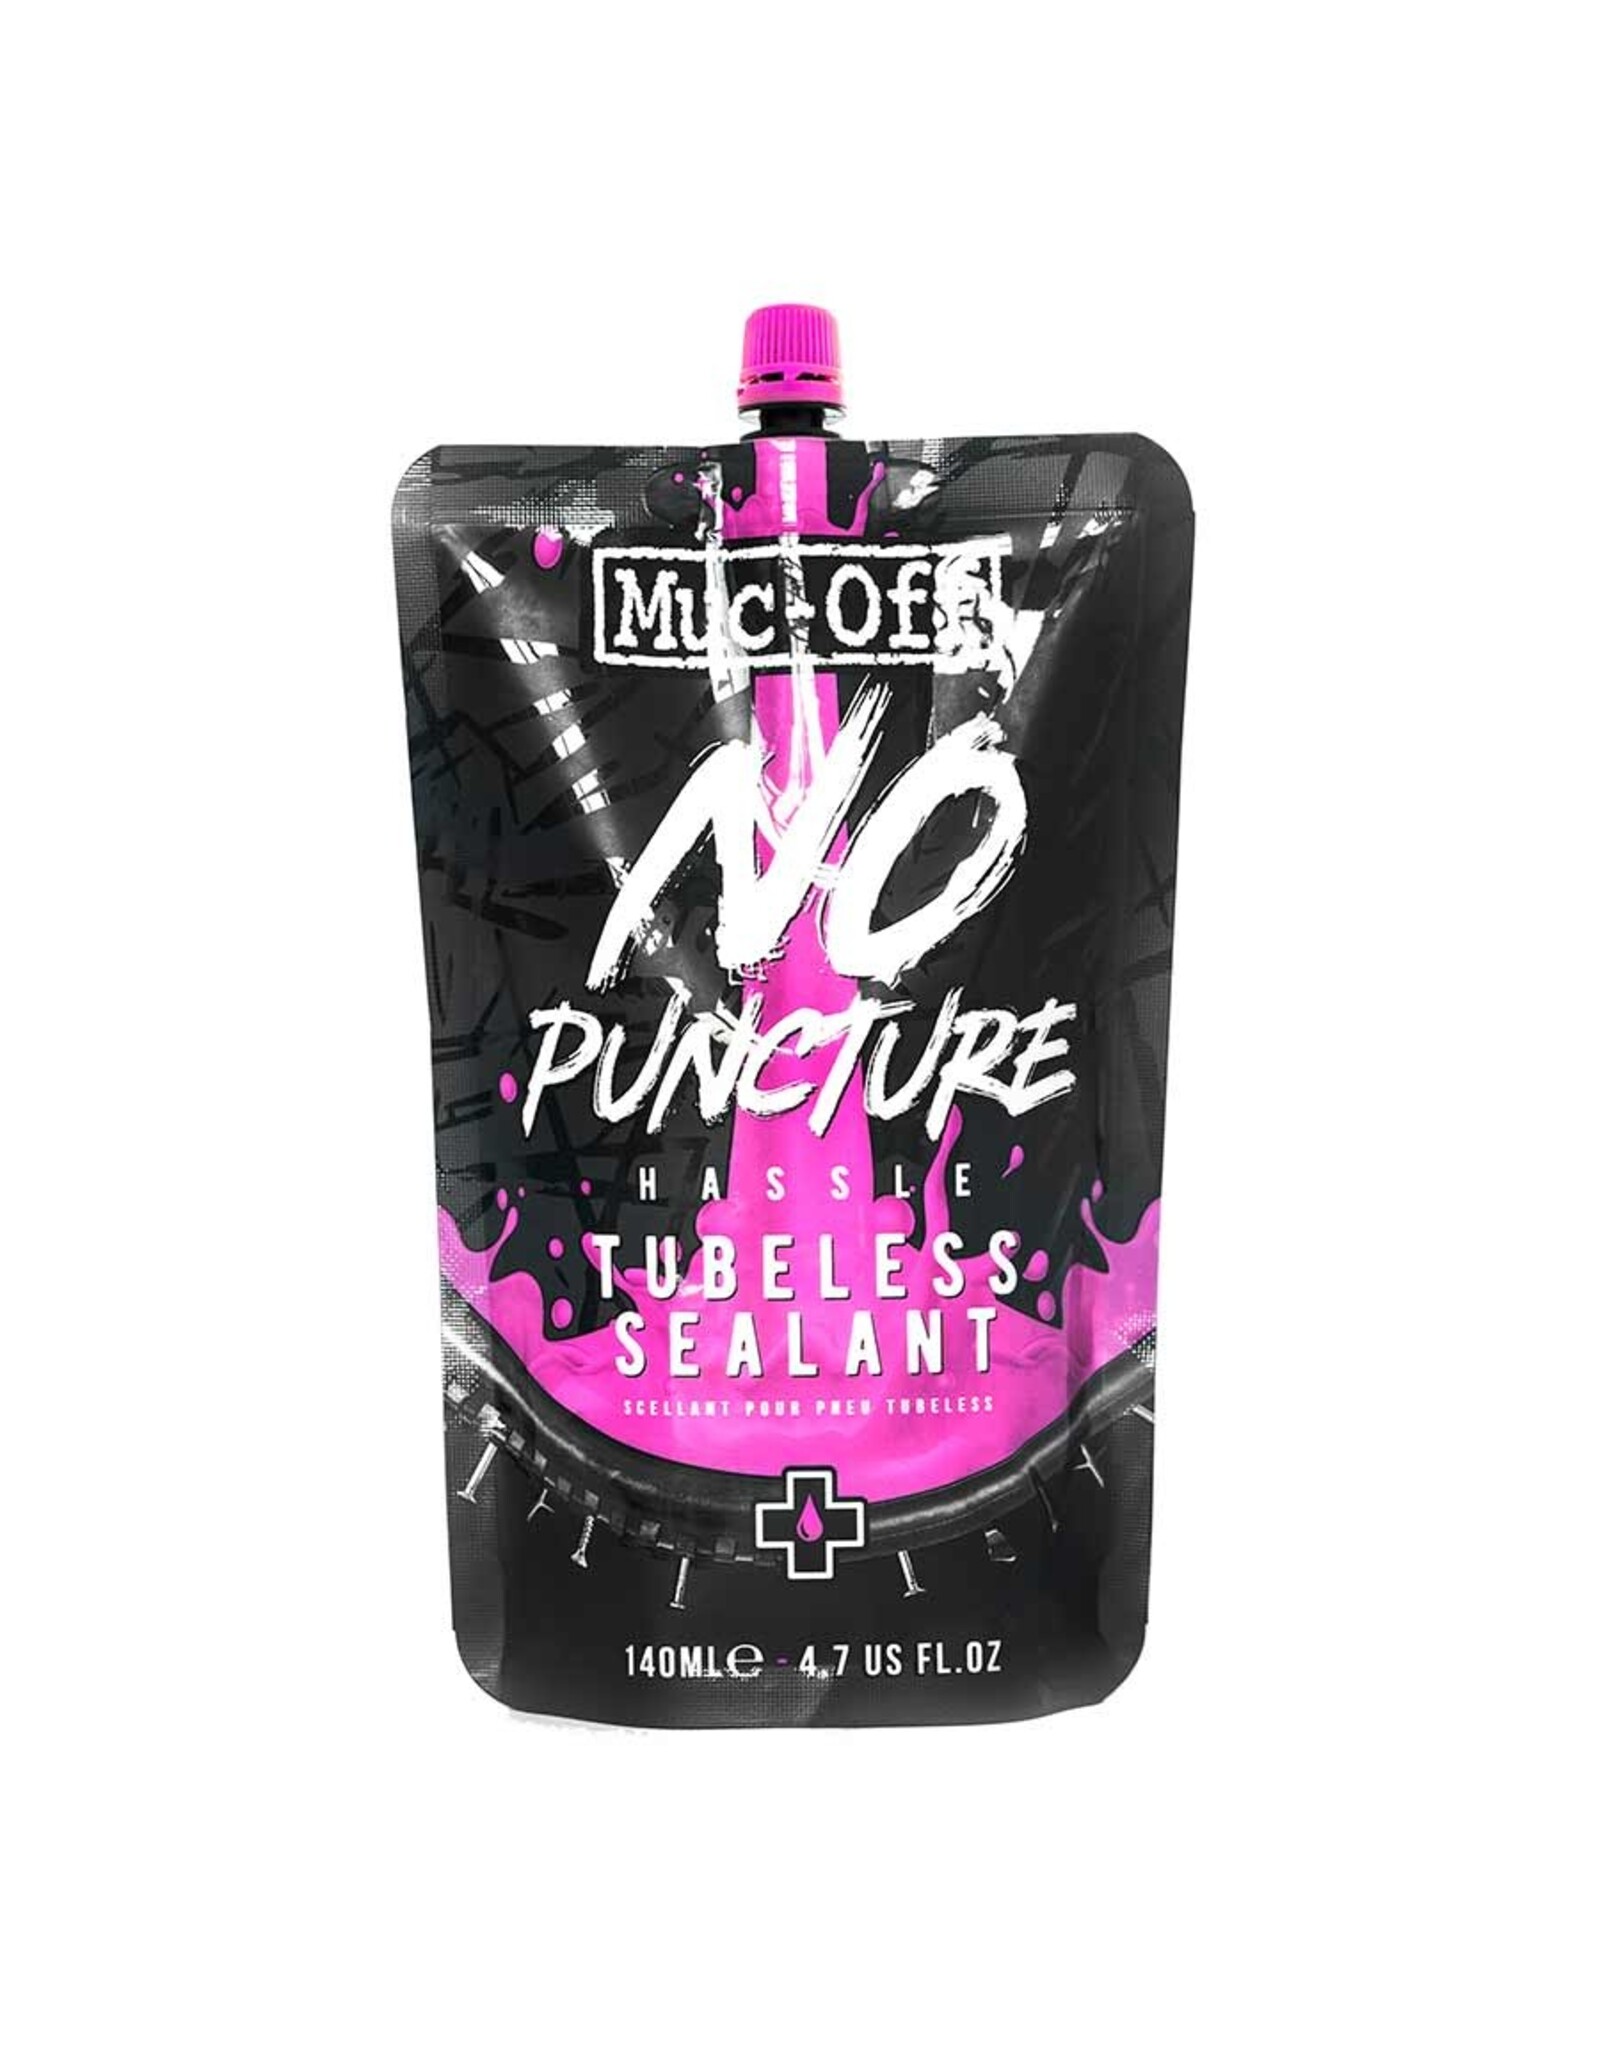 Muc-Off Scellant Muc-Off No Puncture Hassle Tubeless 140ml